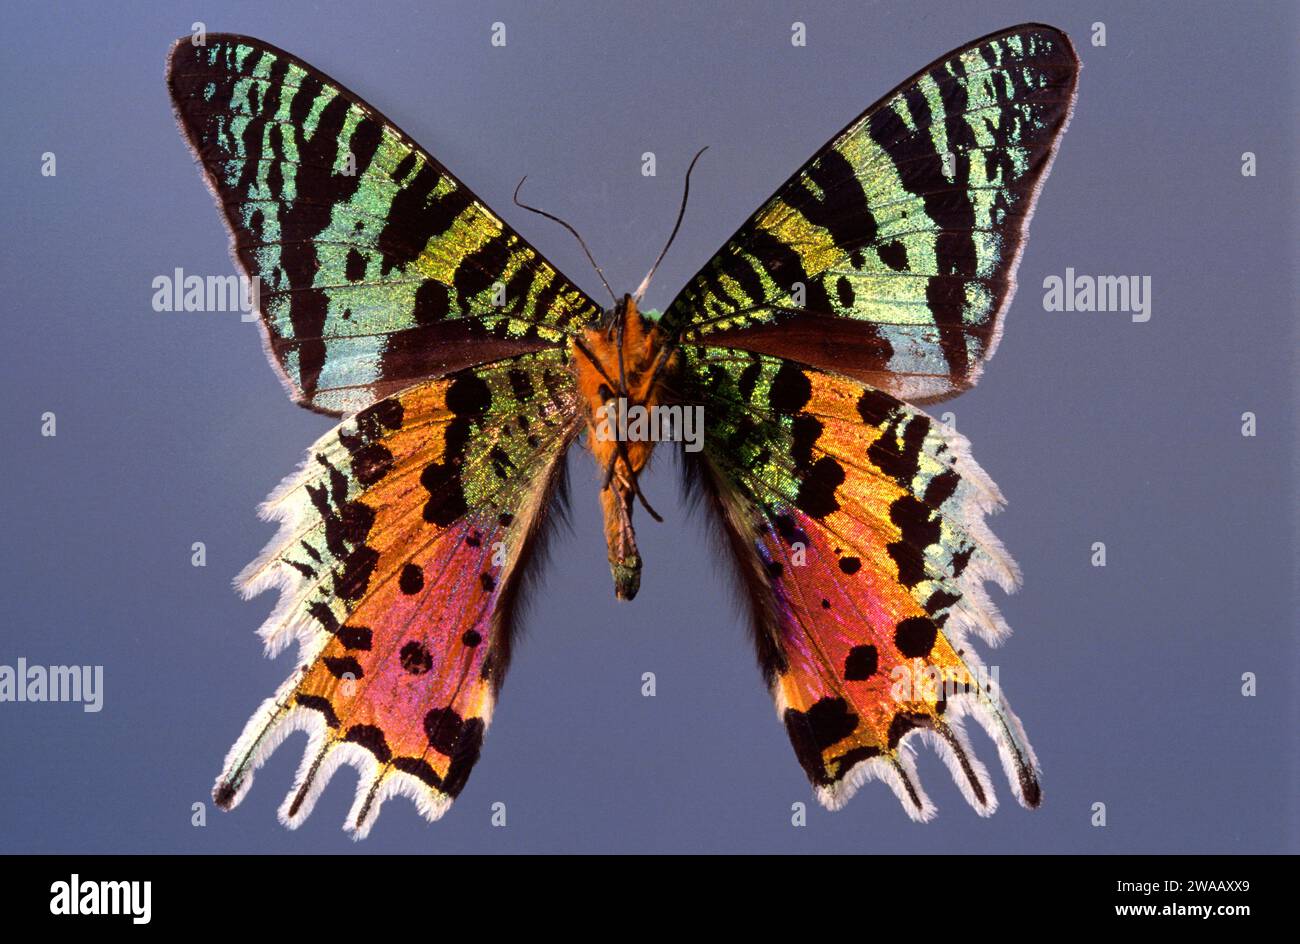 Madagascan sunset moth (Chrysiridia ripheus or Urania ripheus) is a moth endemic to Madagascar. Adult, ventral side. Stock Photo